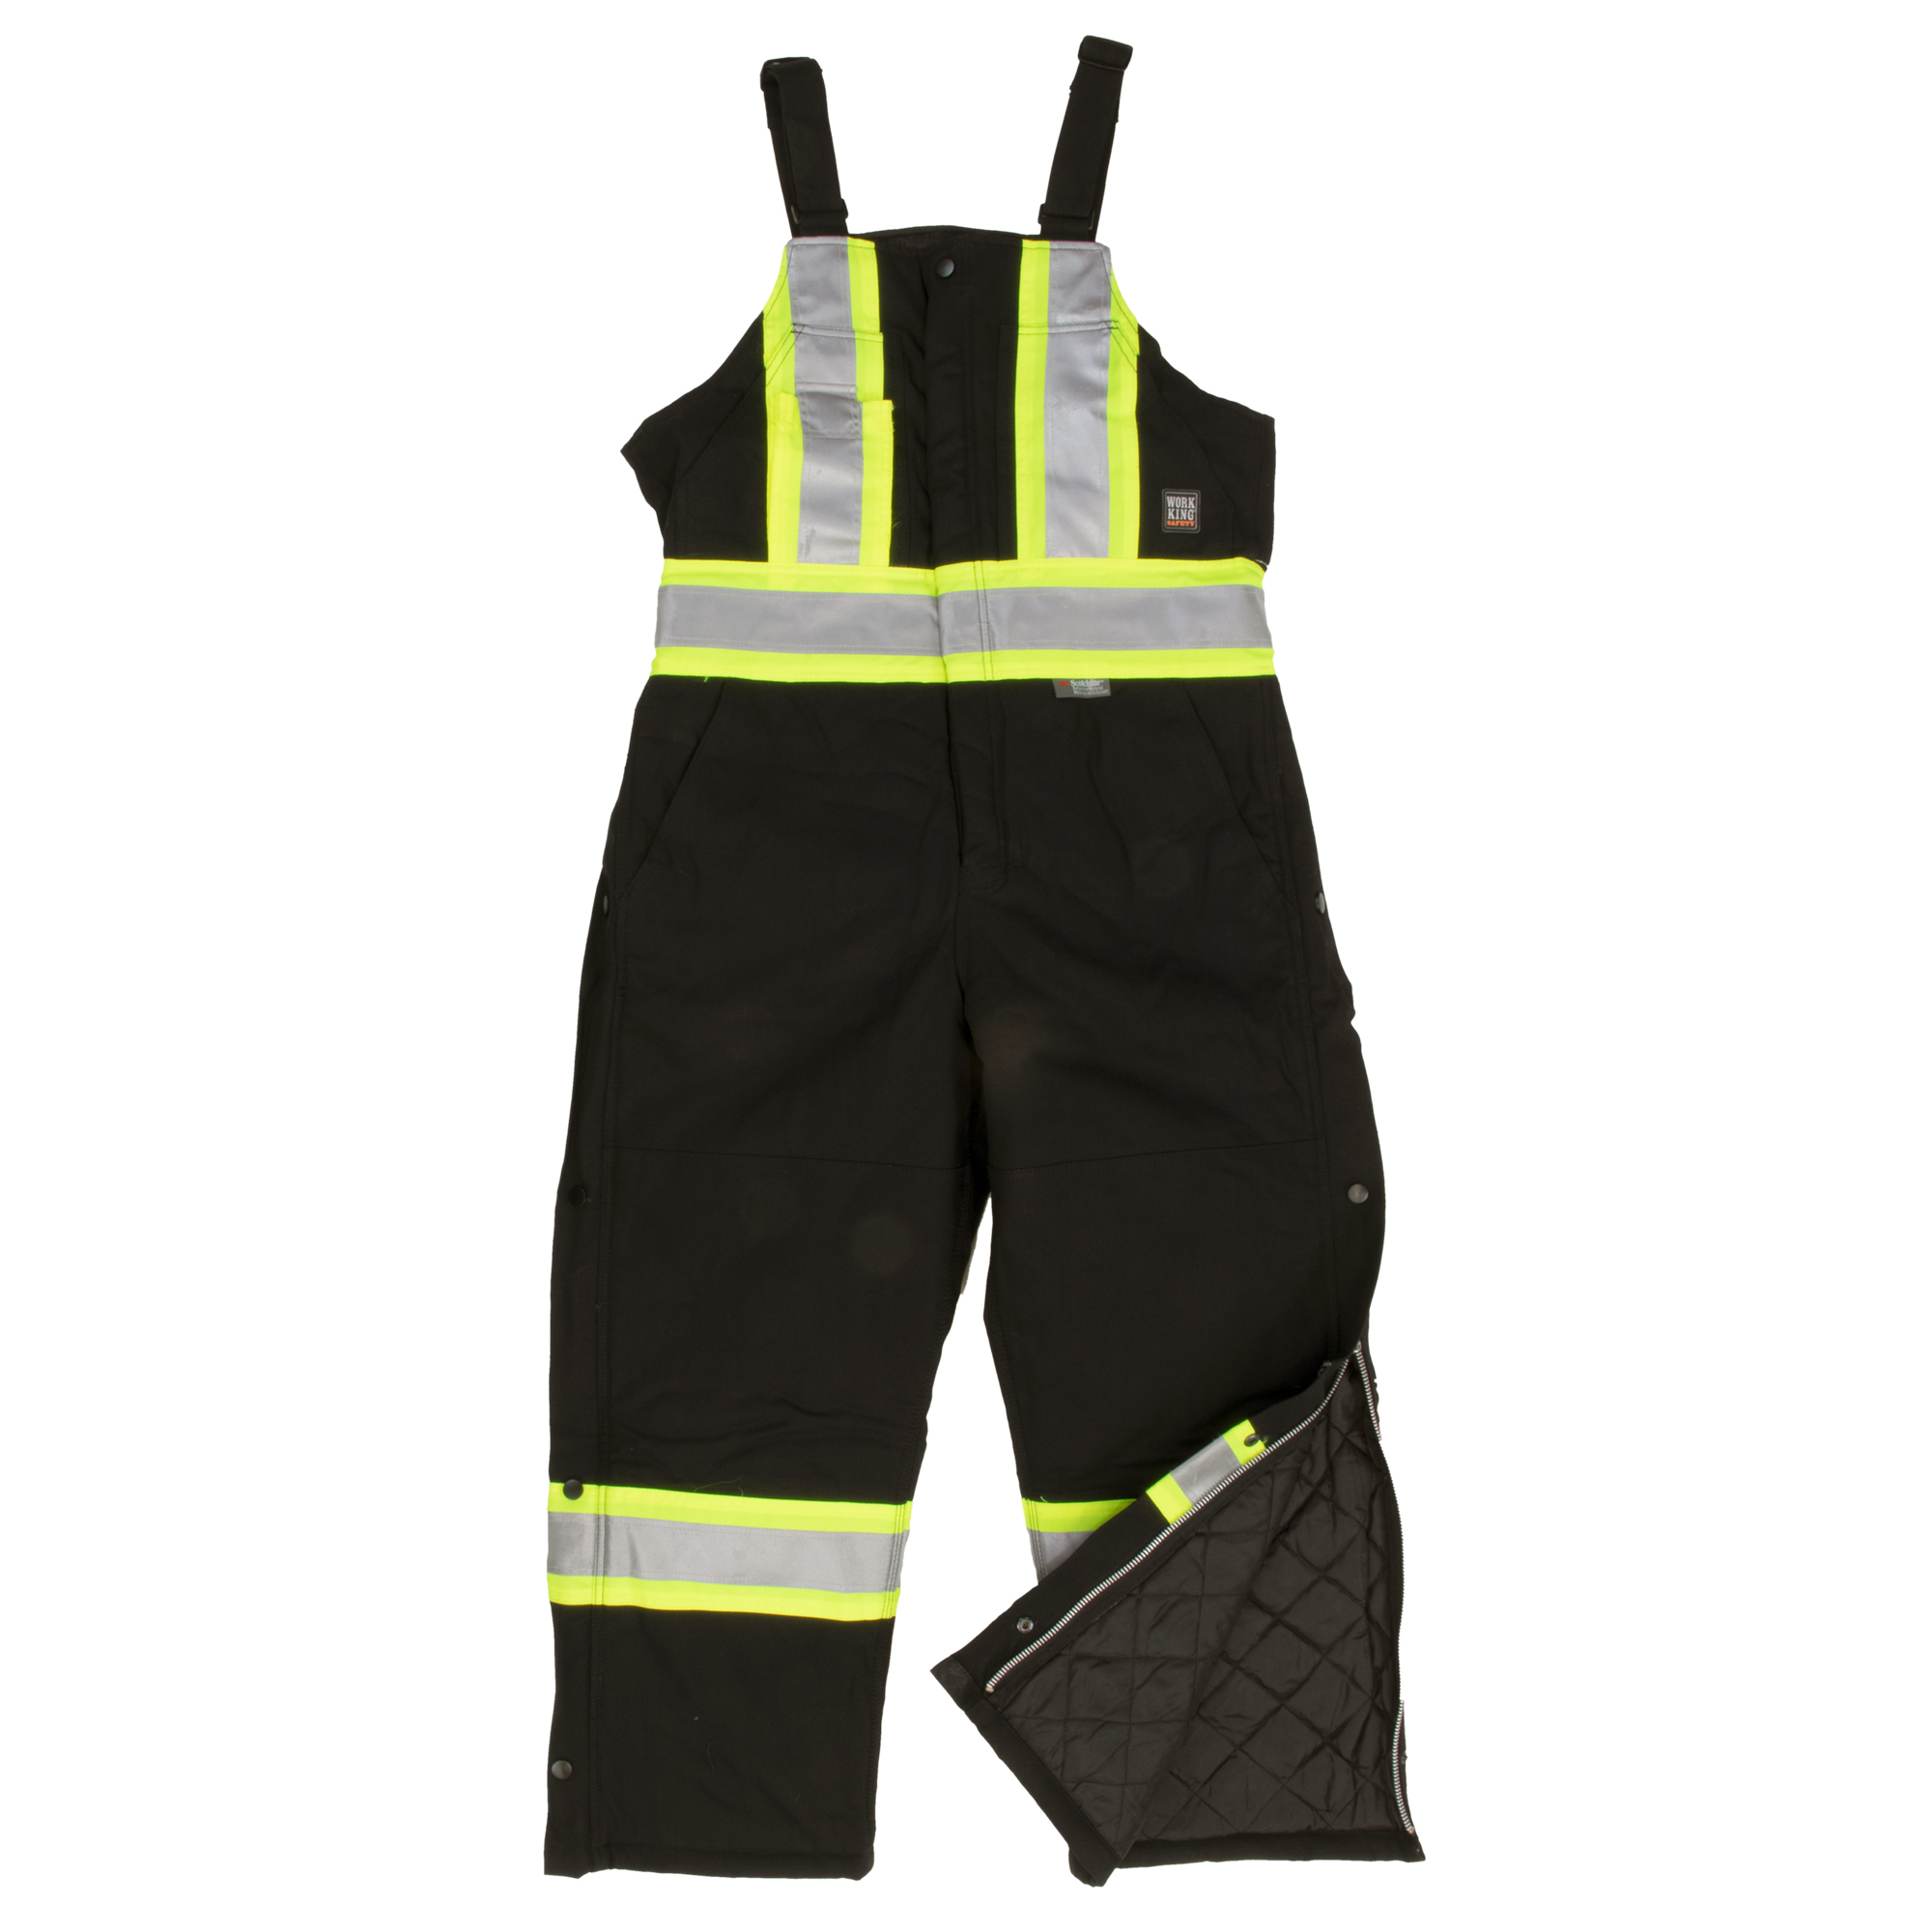 Tough Duck, Insulated Safety Overall, Size XL, Color Black, Model S75711